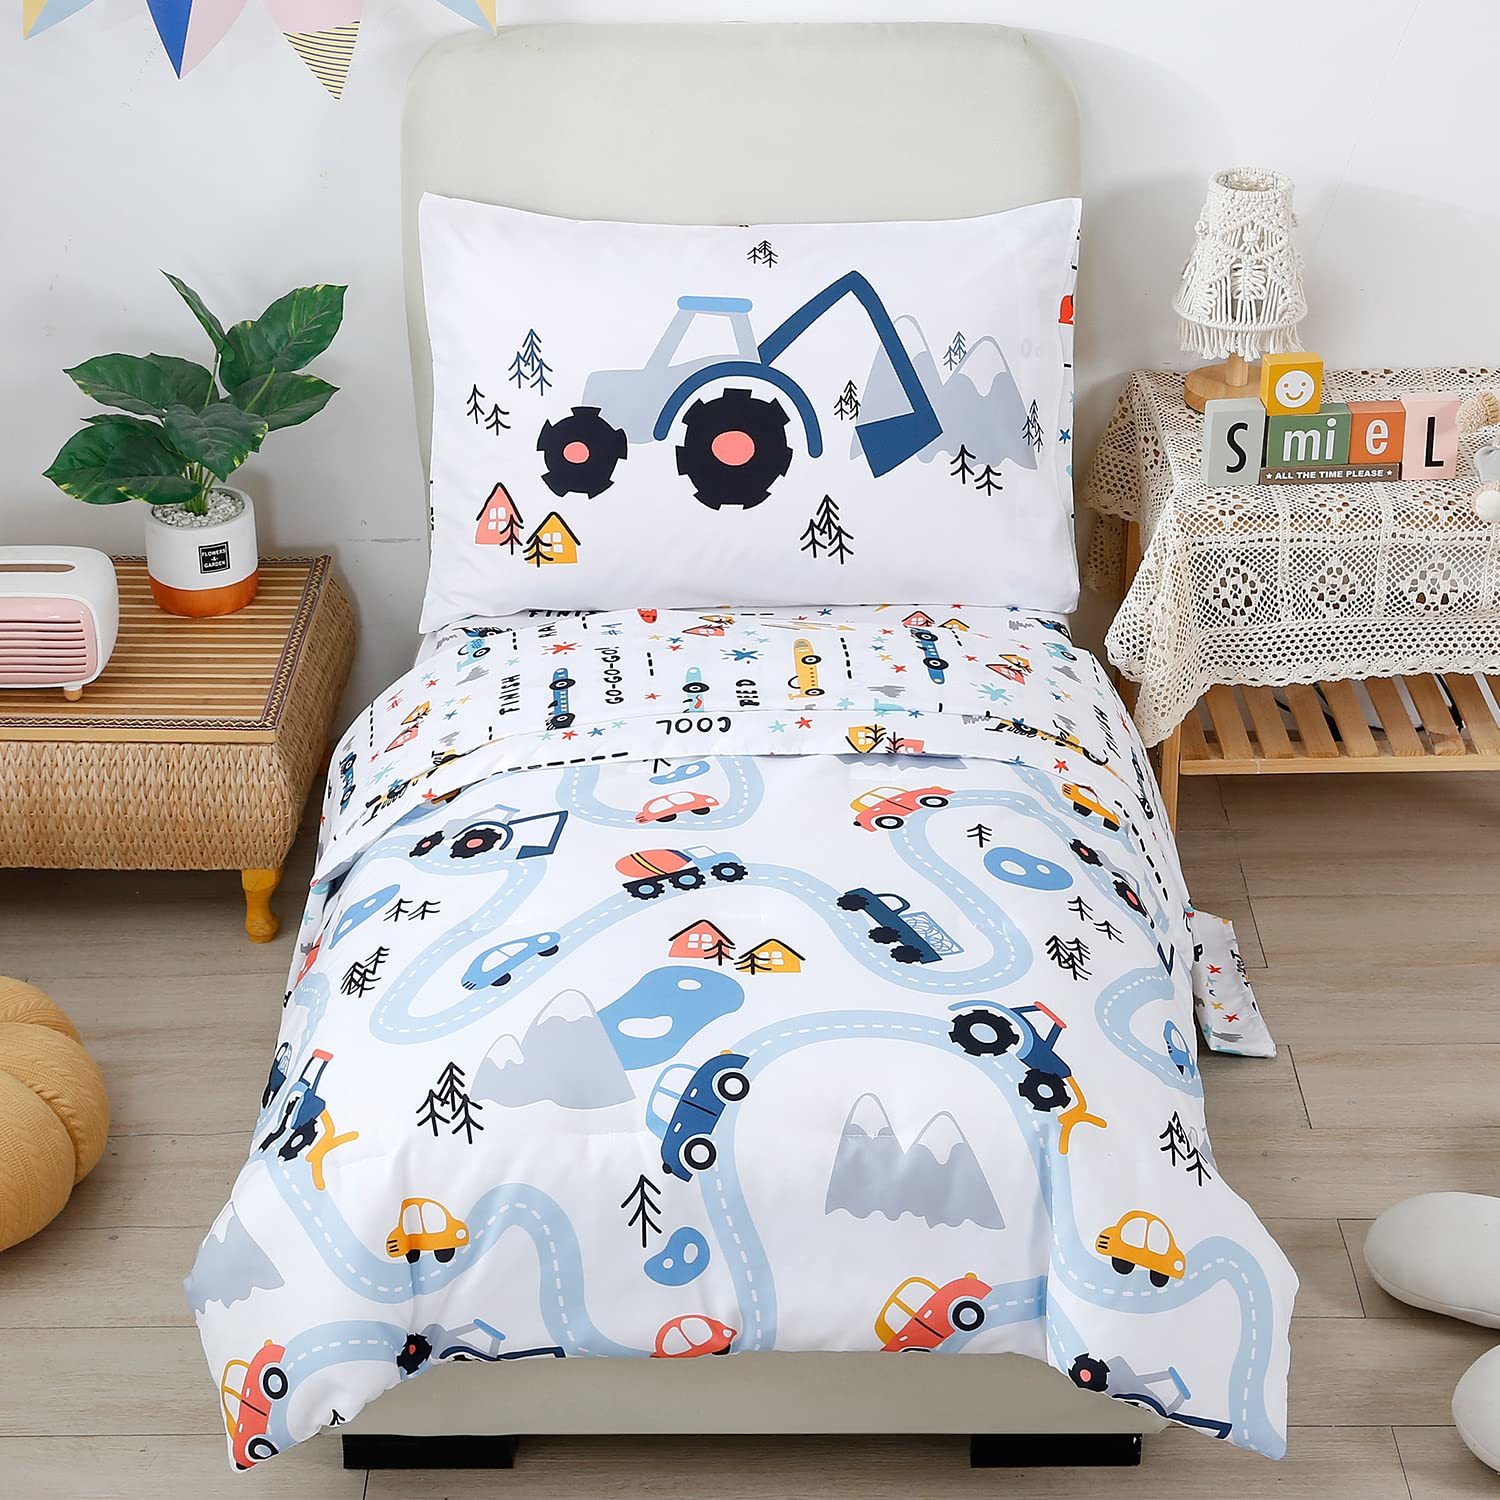 Toddler Bedding Kids 4 Pieces Bed In A Bag For Boys Cars Printed Microfiber Todd - $73.99